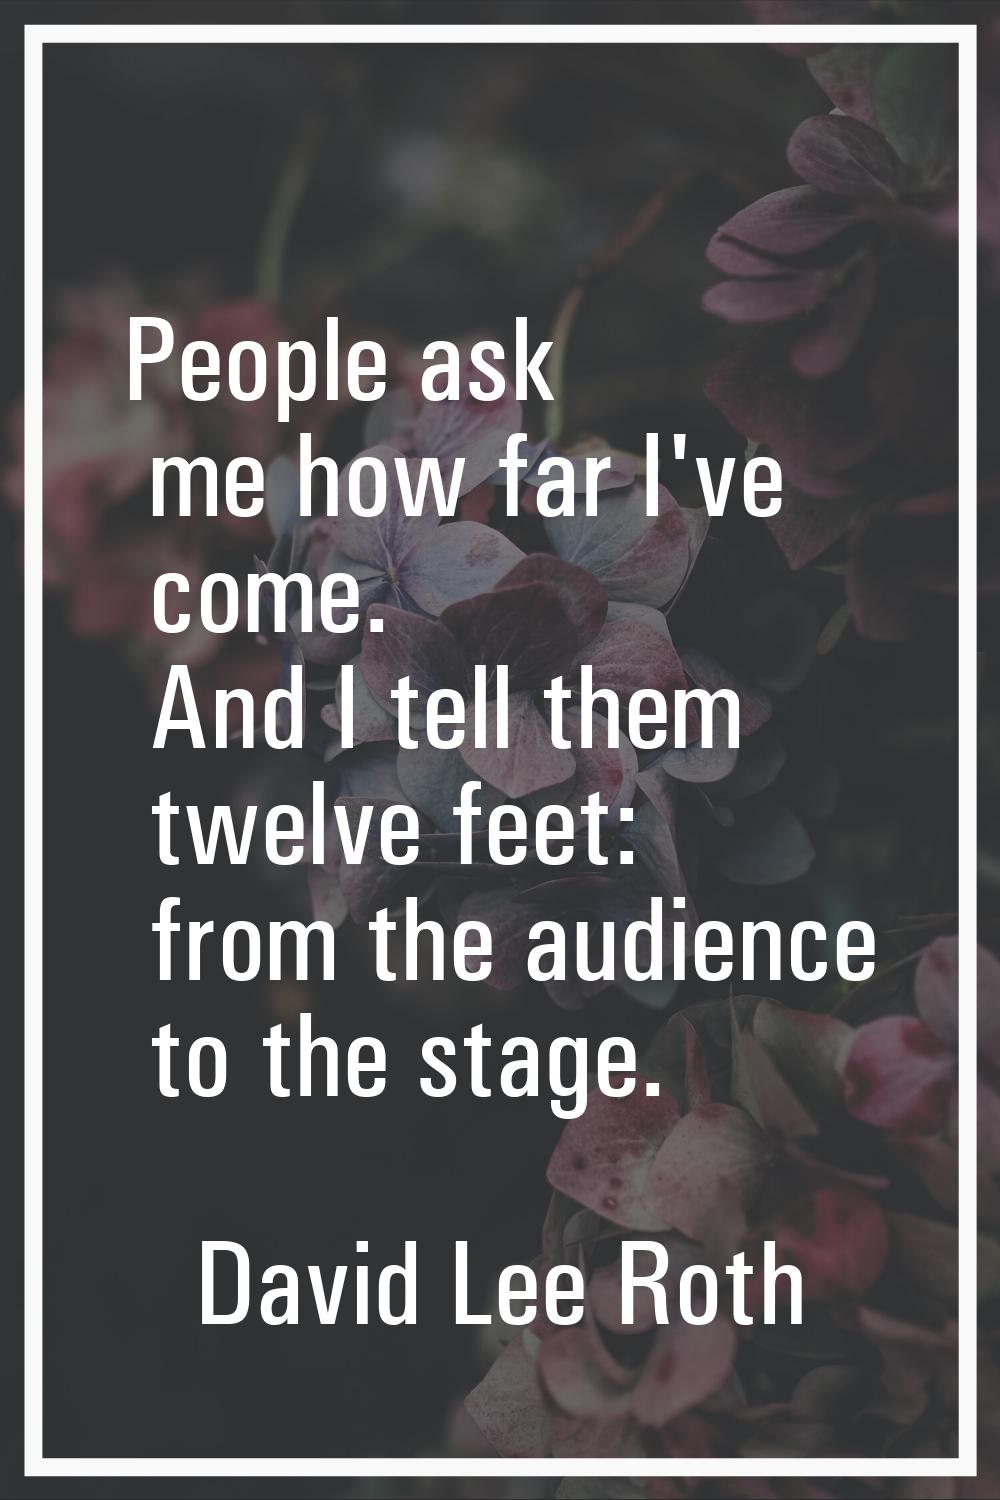 People ask me how far I've come. And I tell them twelve feet: from the audience to the stage.